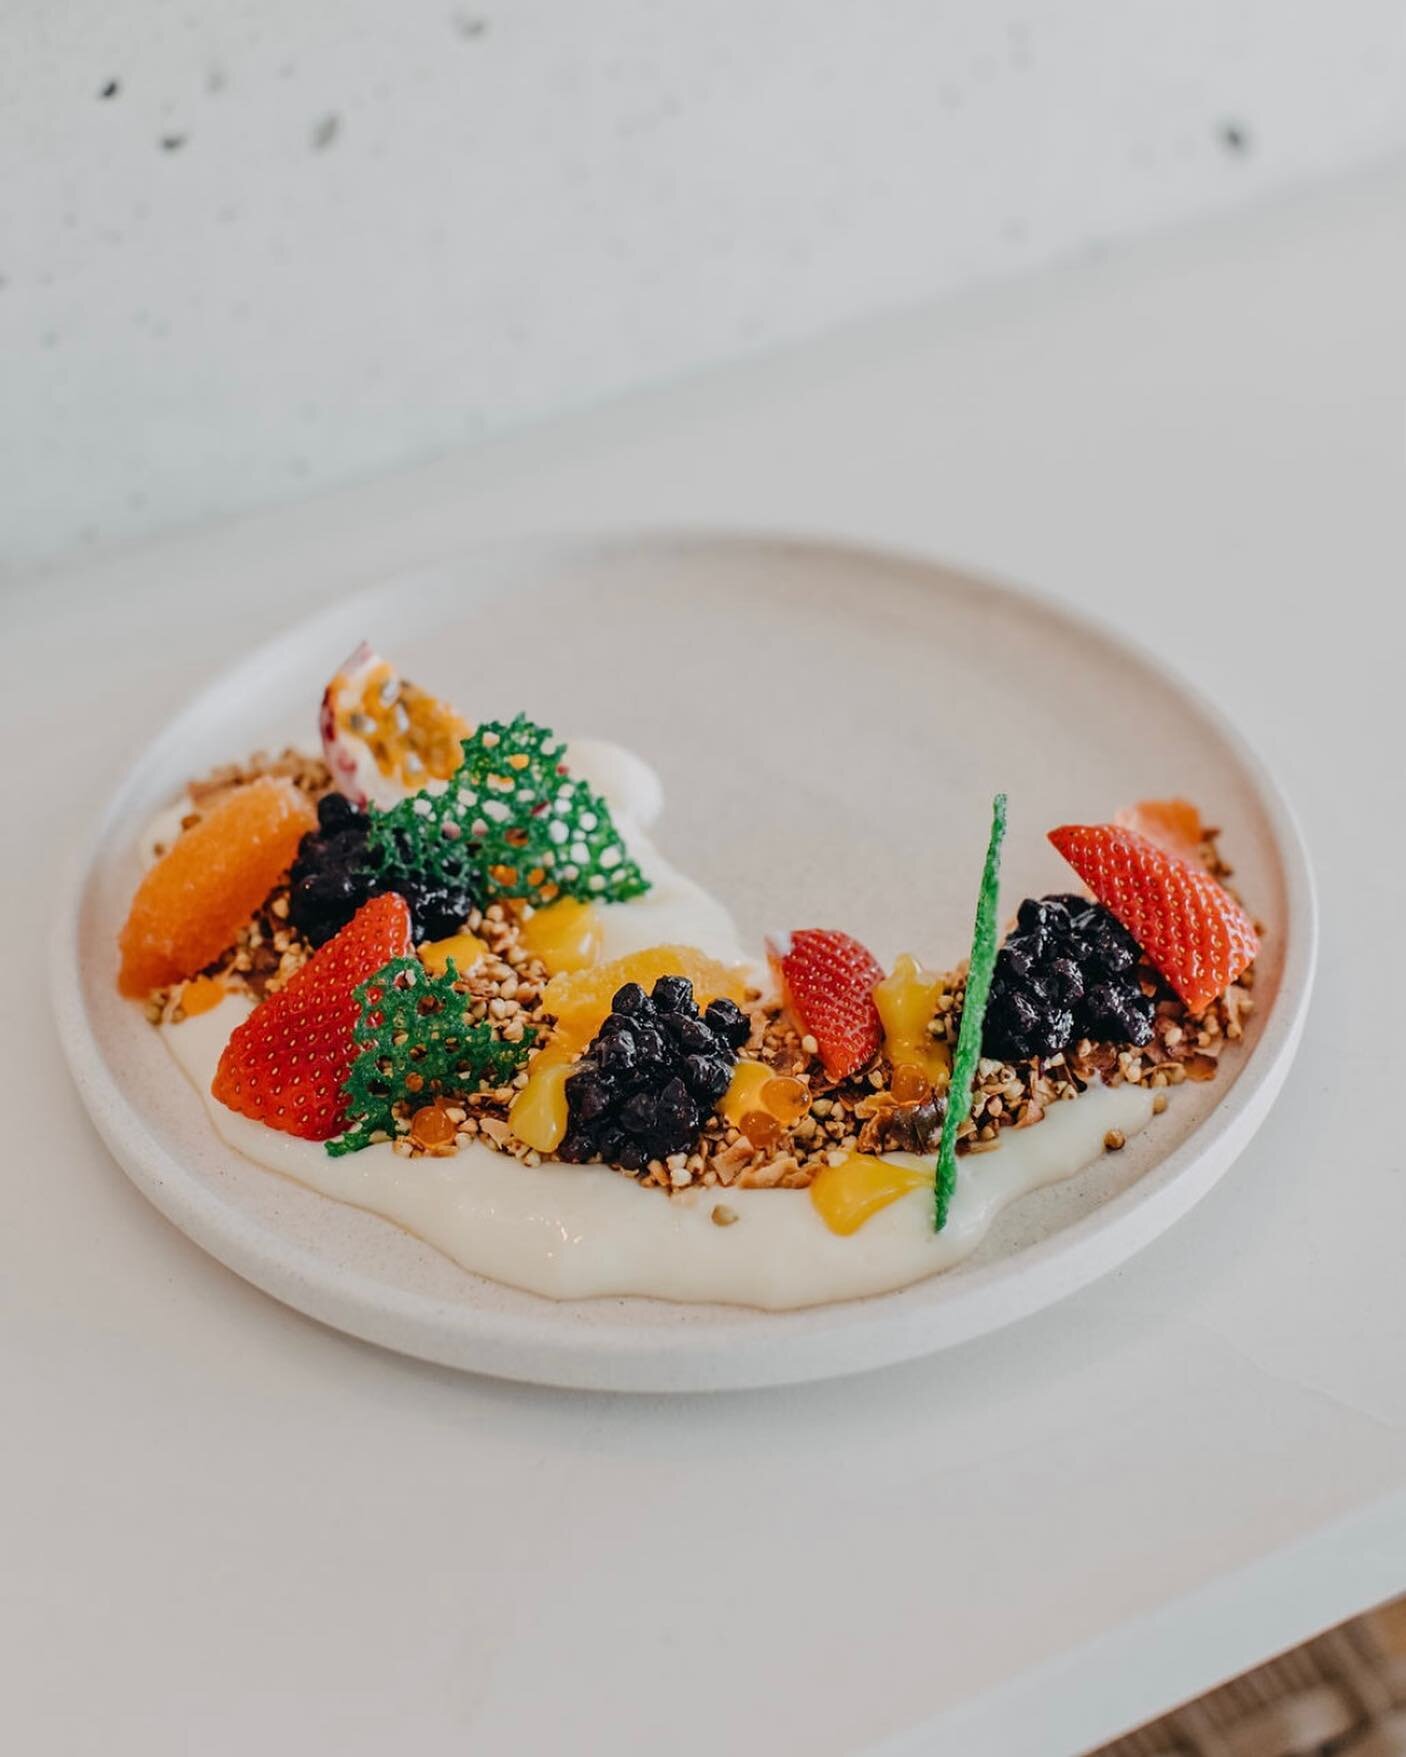 Rise and shine! Our new breakfast menu is here to brighten up your Saturday morning. Introducing the &lsquo;Breakfast Fruit Crumble&rsquo; featuring coconut custard, seasonal fruit, lemon curd + vanilla buckwheat crumble&hellip; We&rsquo;d love to he